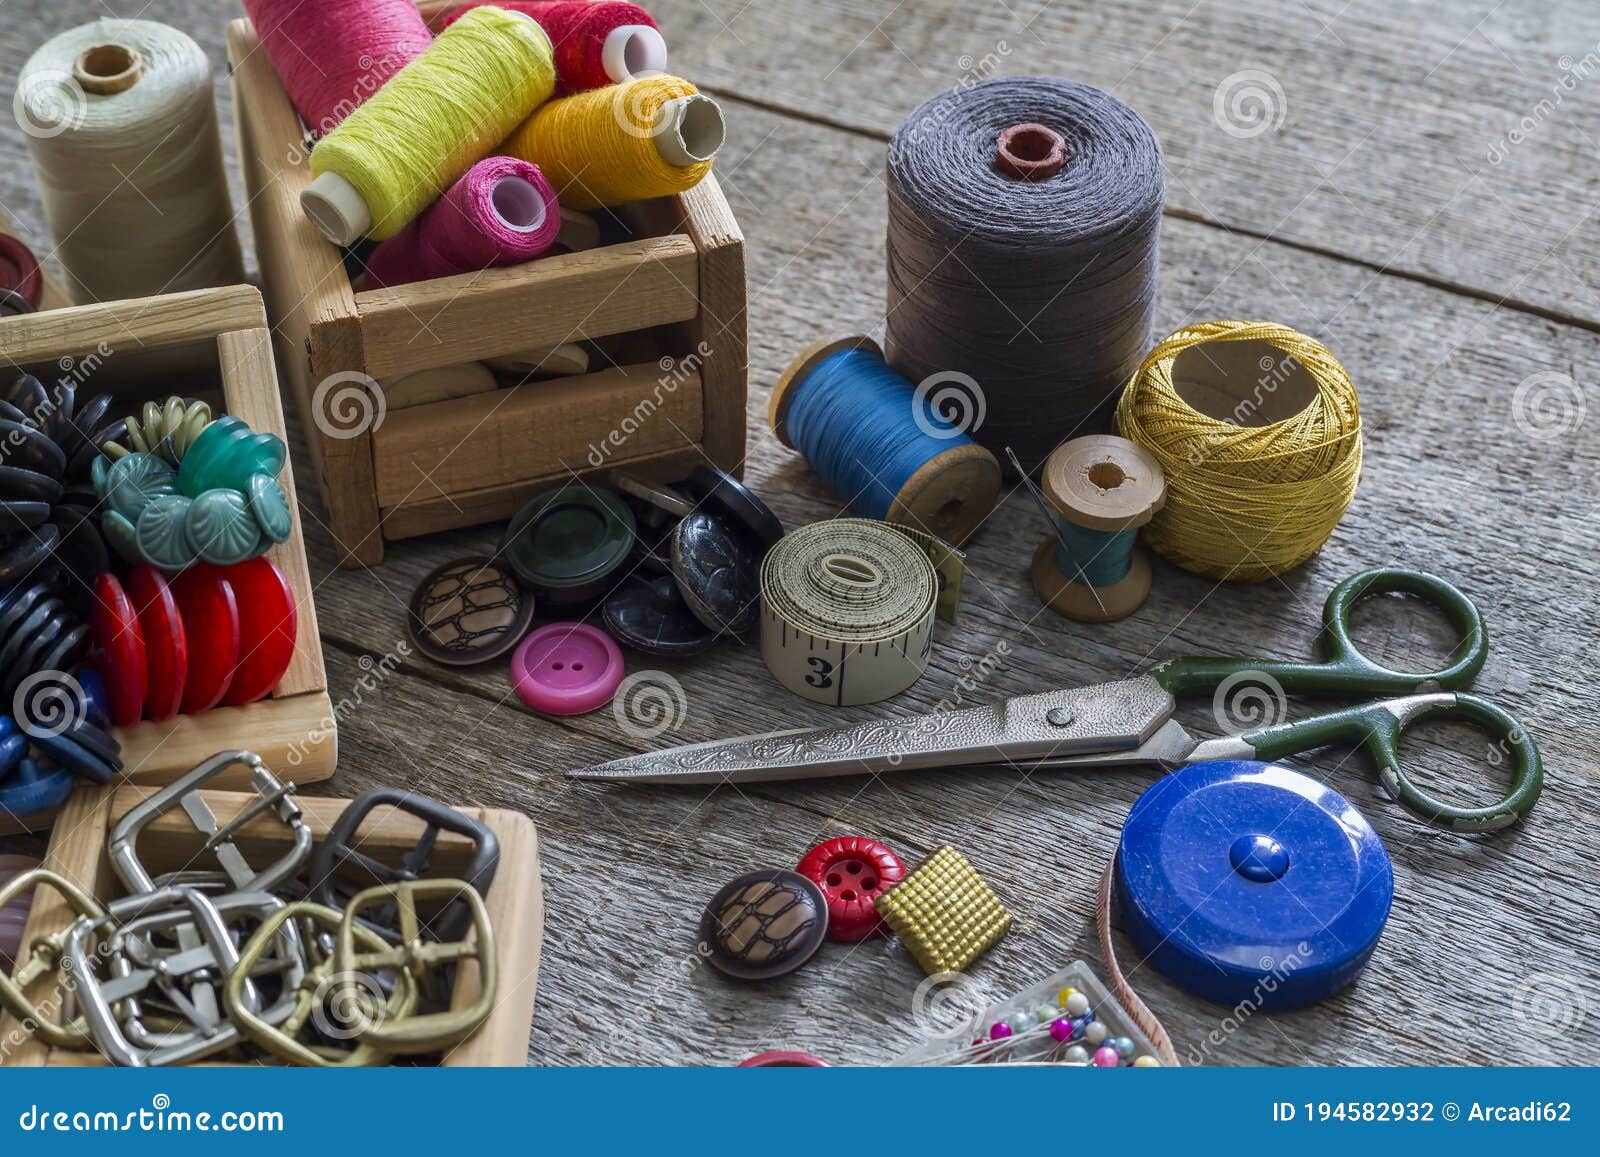 thumbs./z/old-sewing-accessories-too